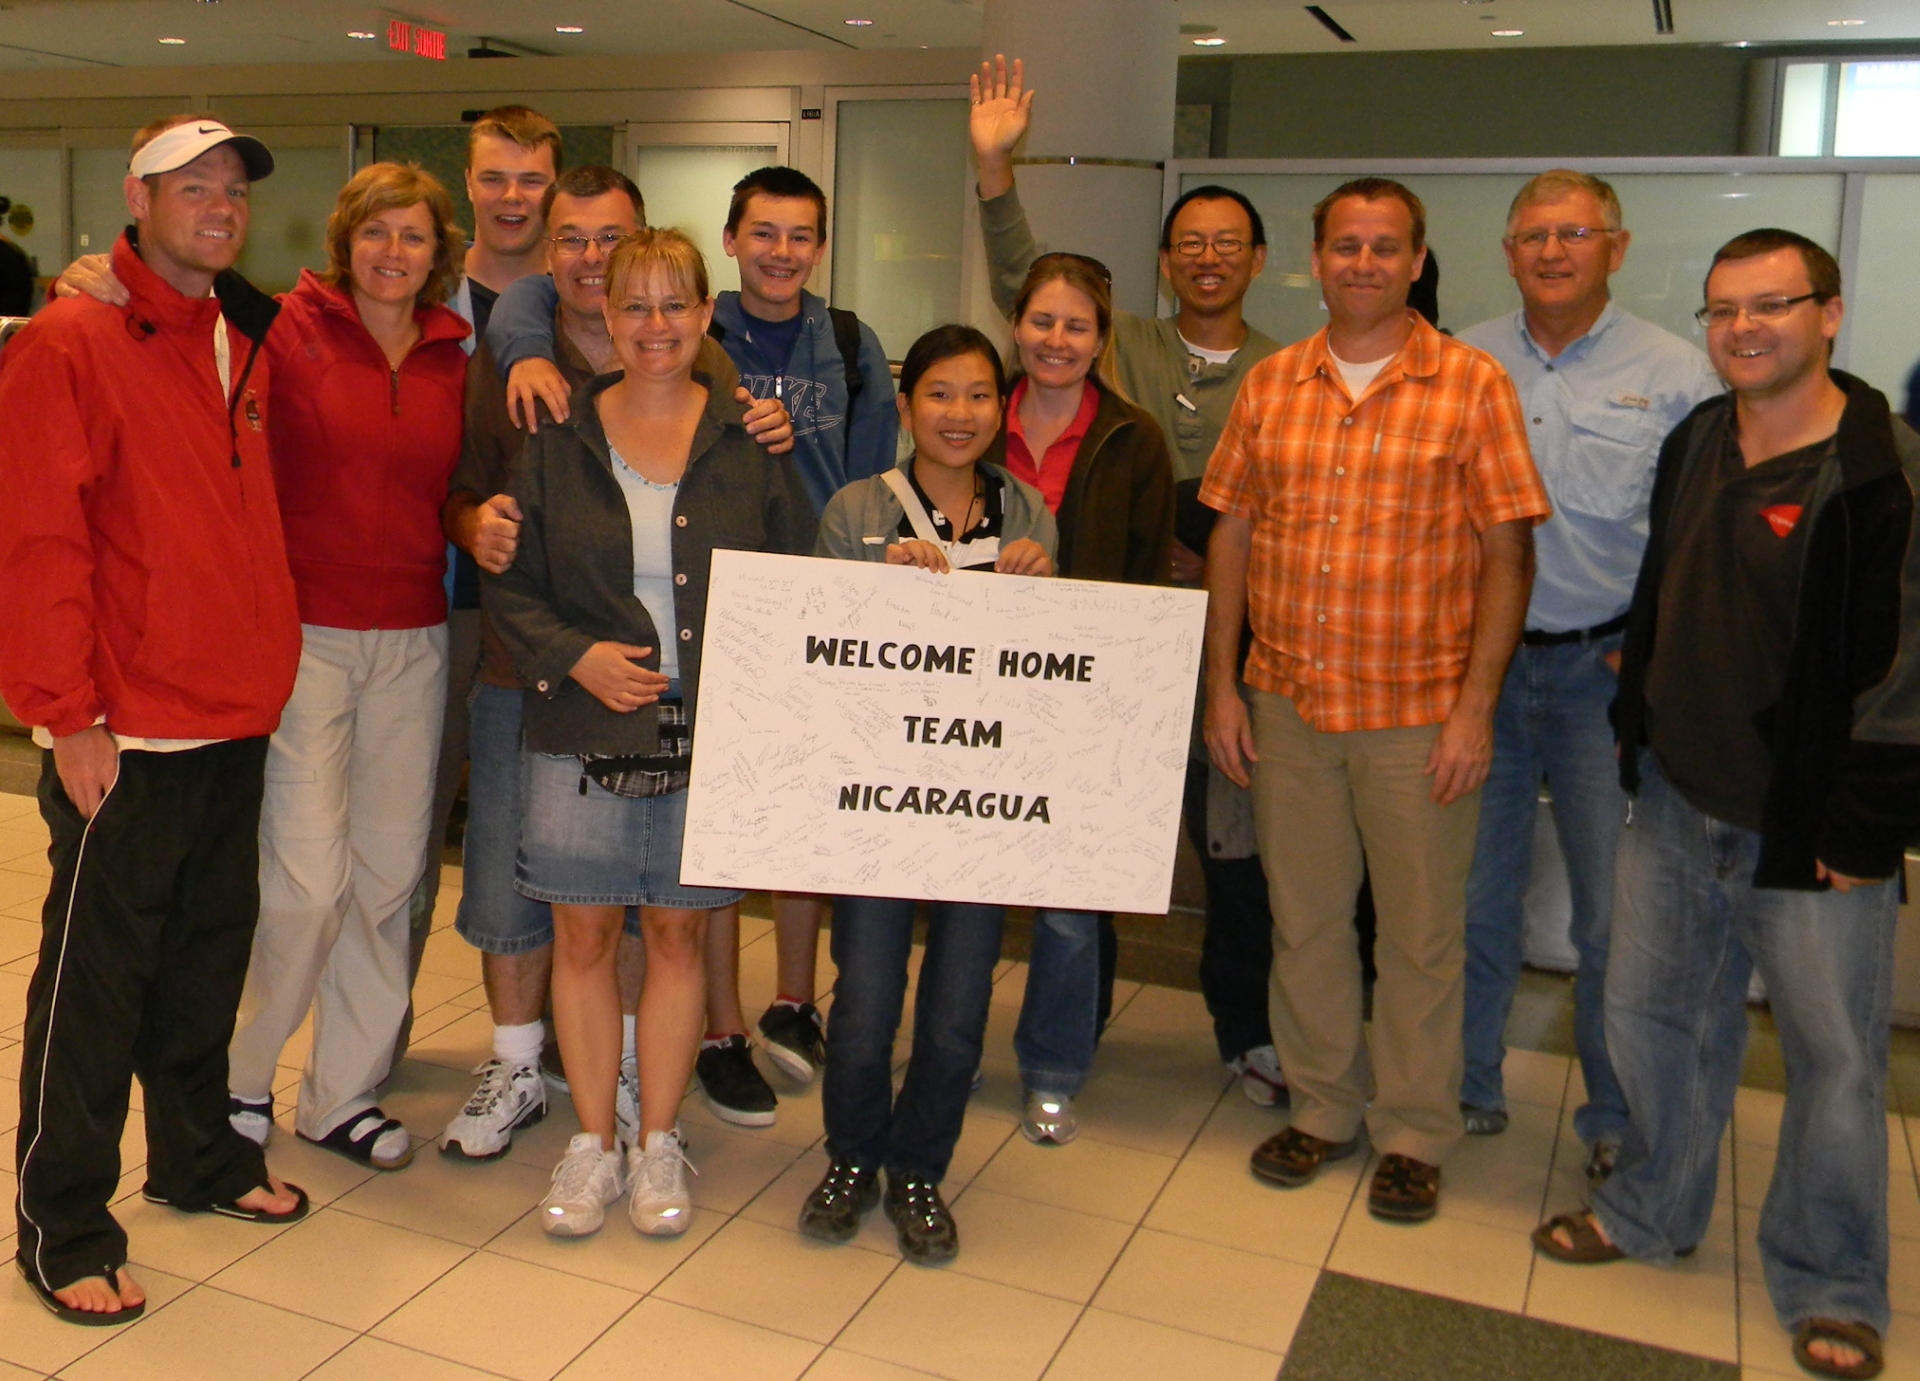 Team Nicaragua is home reduced